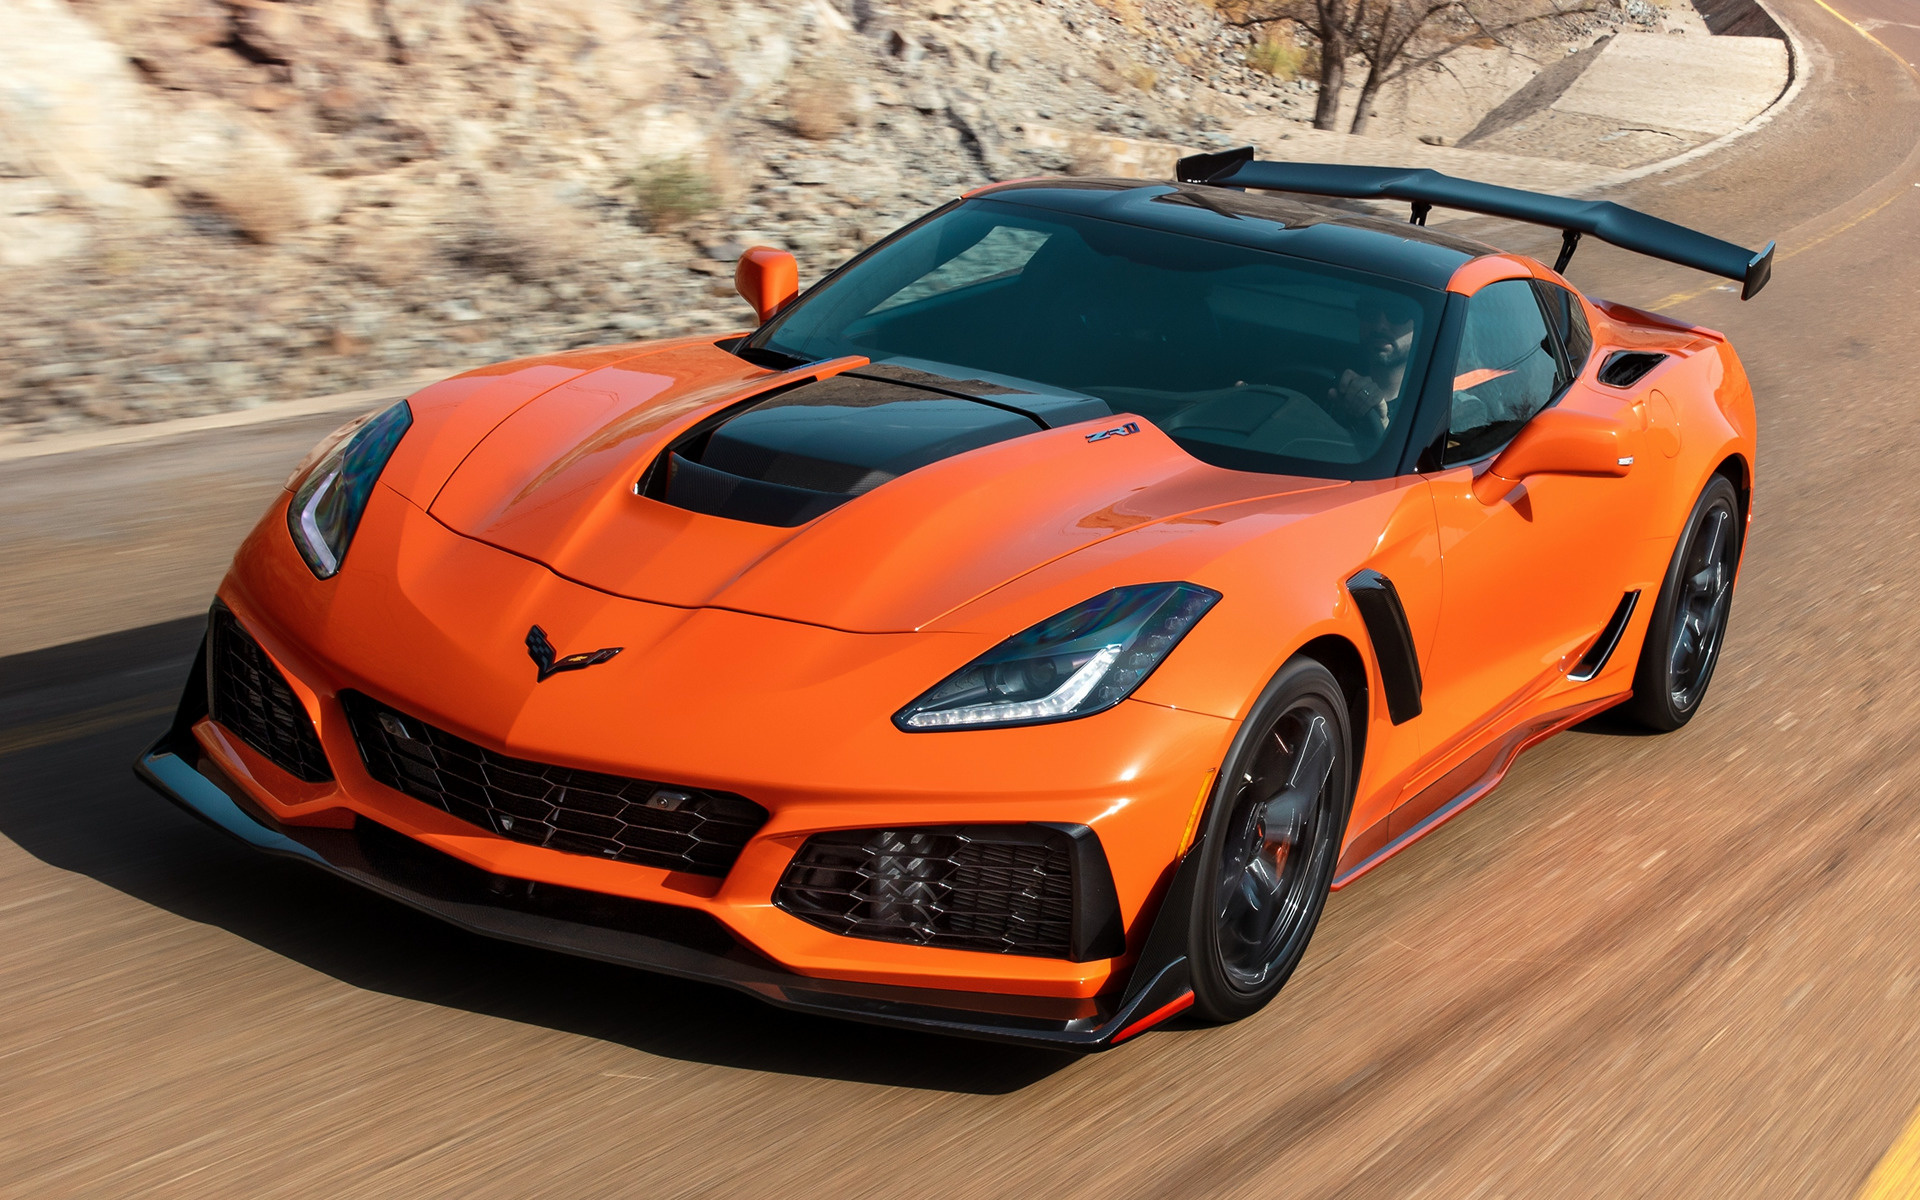 2018 Chevrolet Corvette Zr1 Wallpapers And Hd Images - Chevrolet Corvette Zr1 , HD Wallpaper & Backgrounds